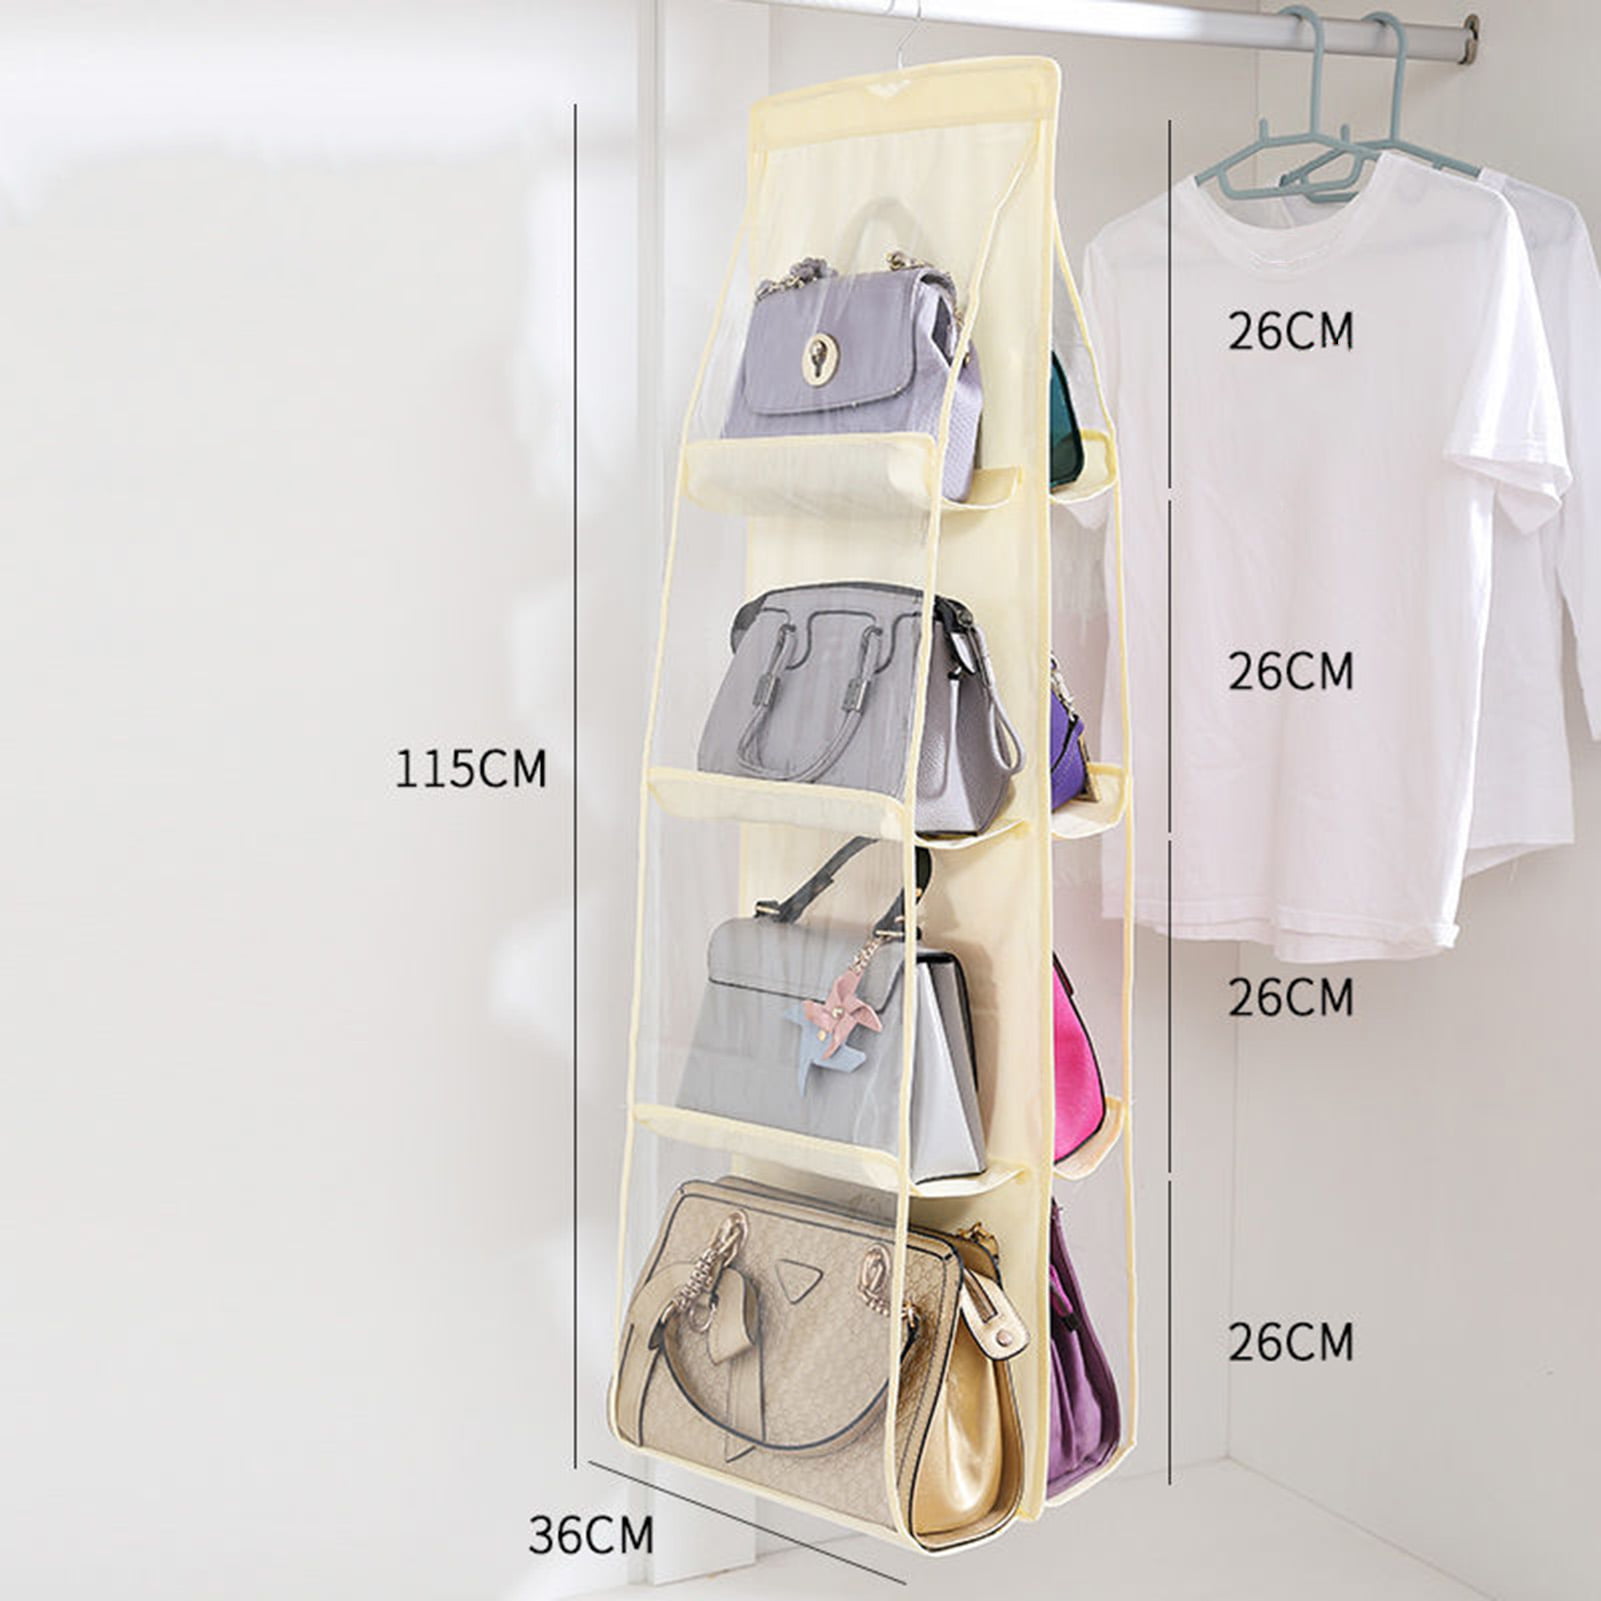 Moryimi Purse Organizer for Closet, Adjustable Clear Shelf Dividers Purse  Bag Divider for Closet Organizer, Handbag Organizers for Closets :  Amazon.ca: Home